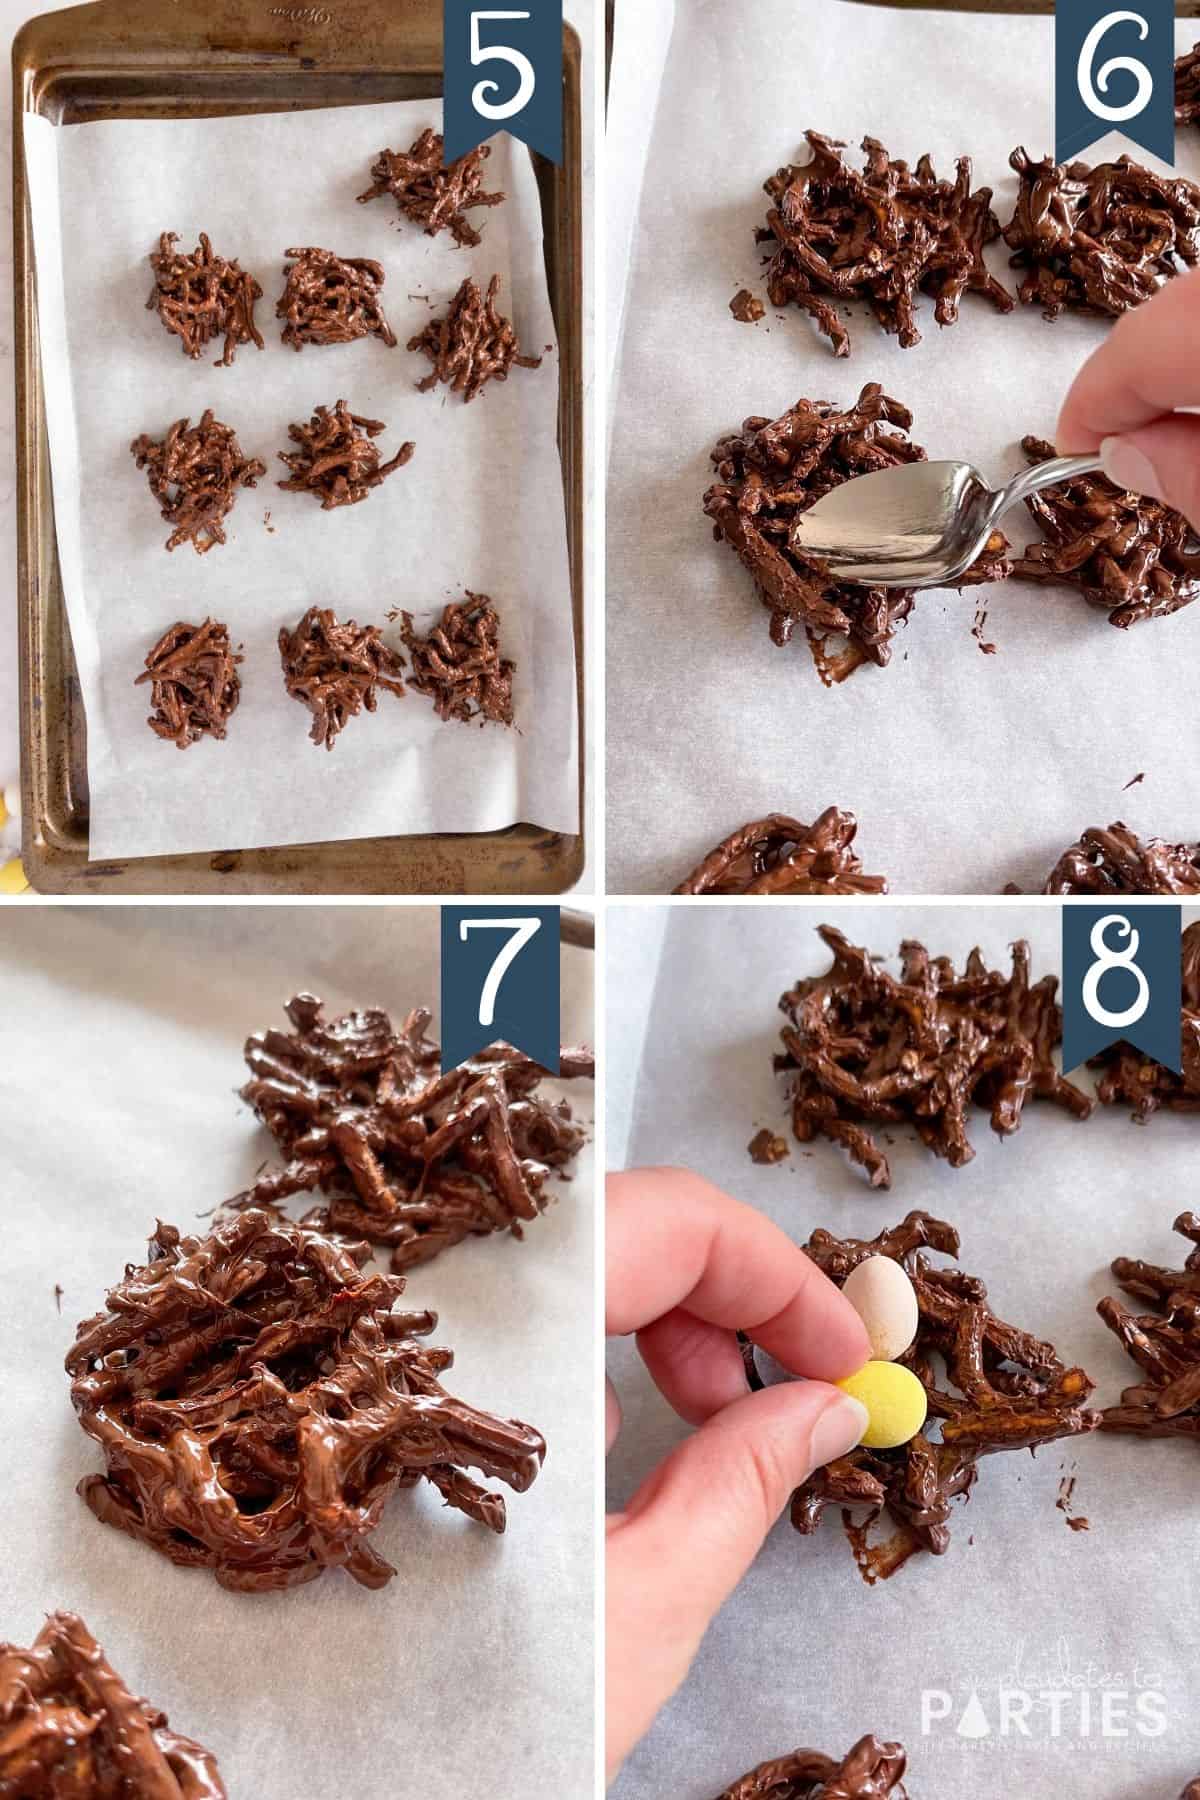 How to make birds nest cookies steps 5 to 8.